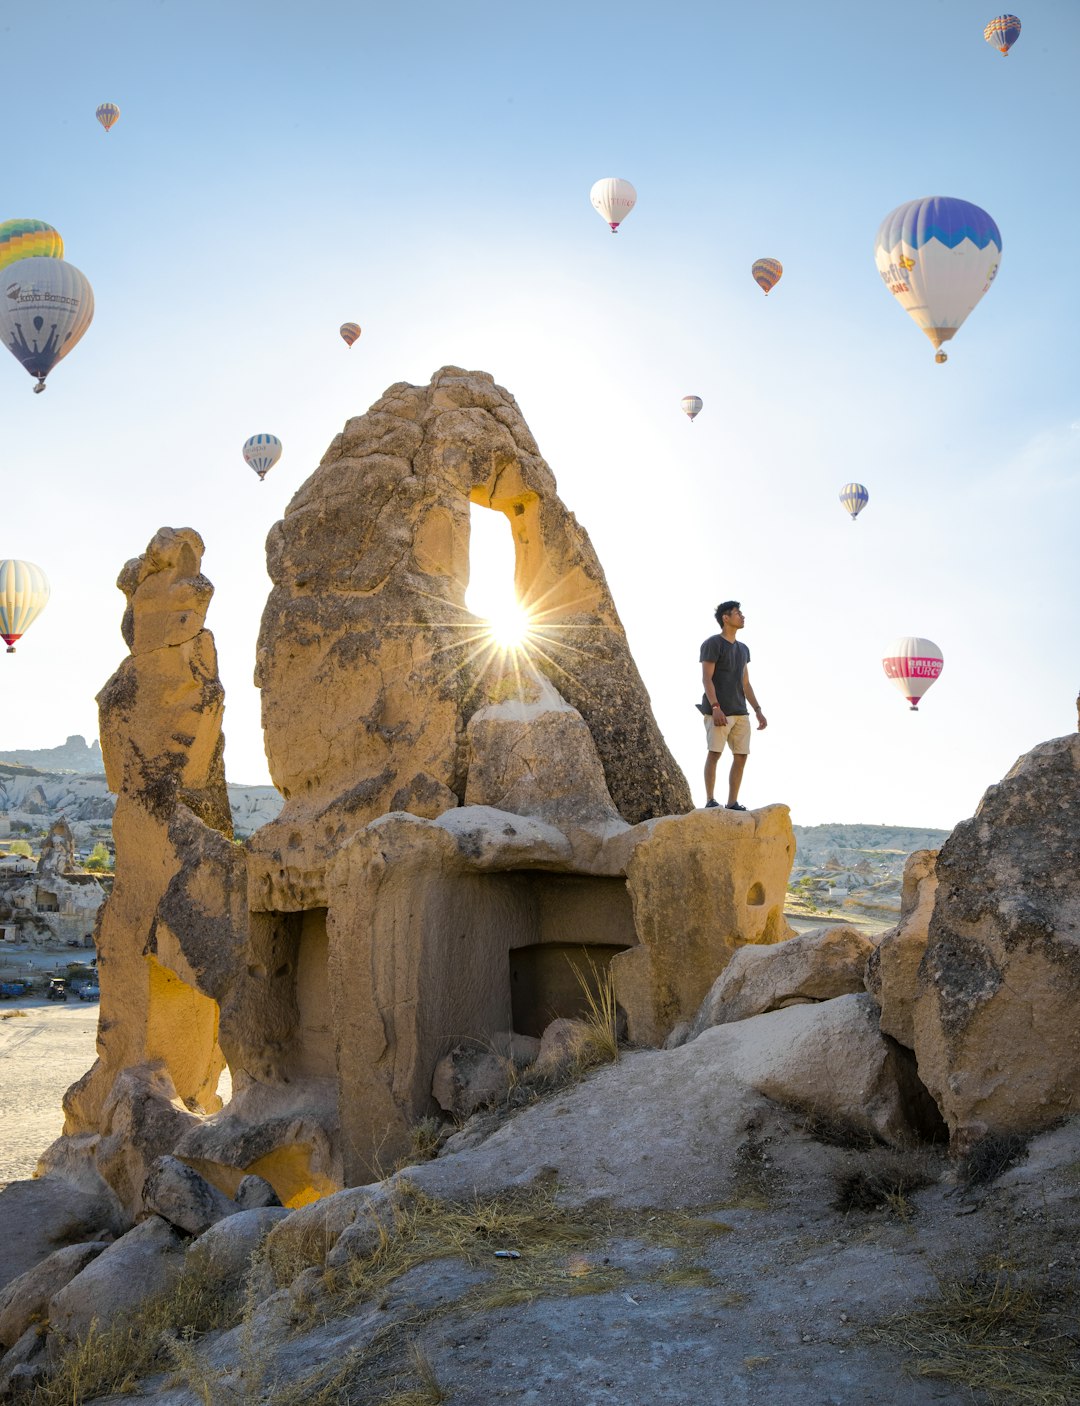 travelers stories about Hot air ballooning in Hot Air Balloon Cappadocia, Turkey